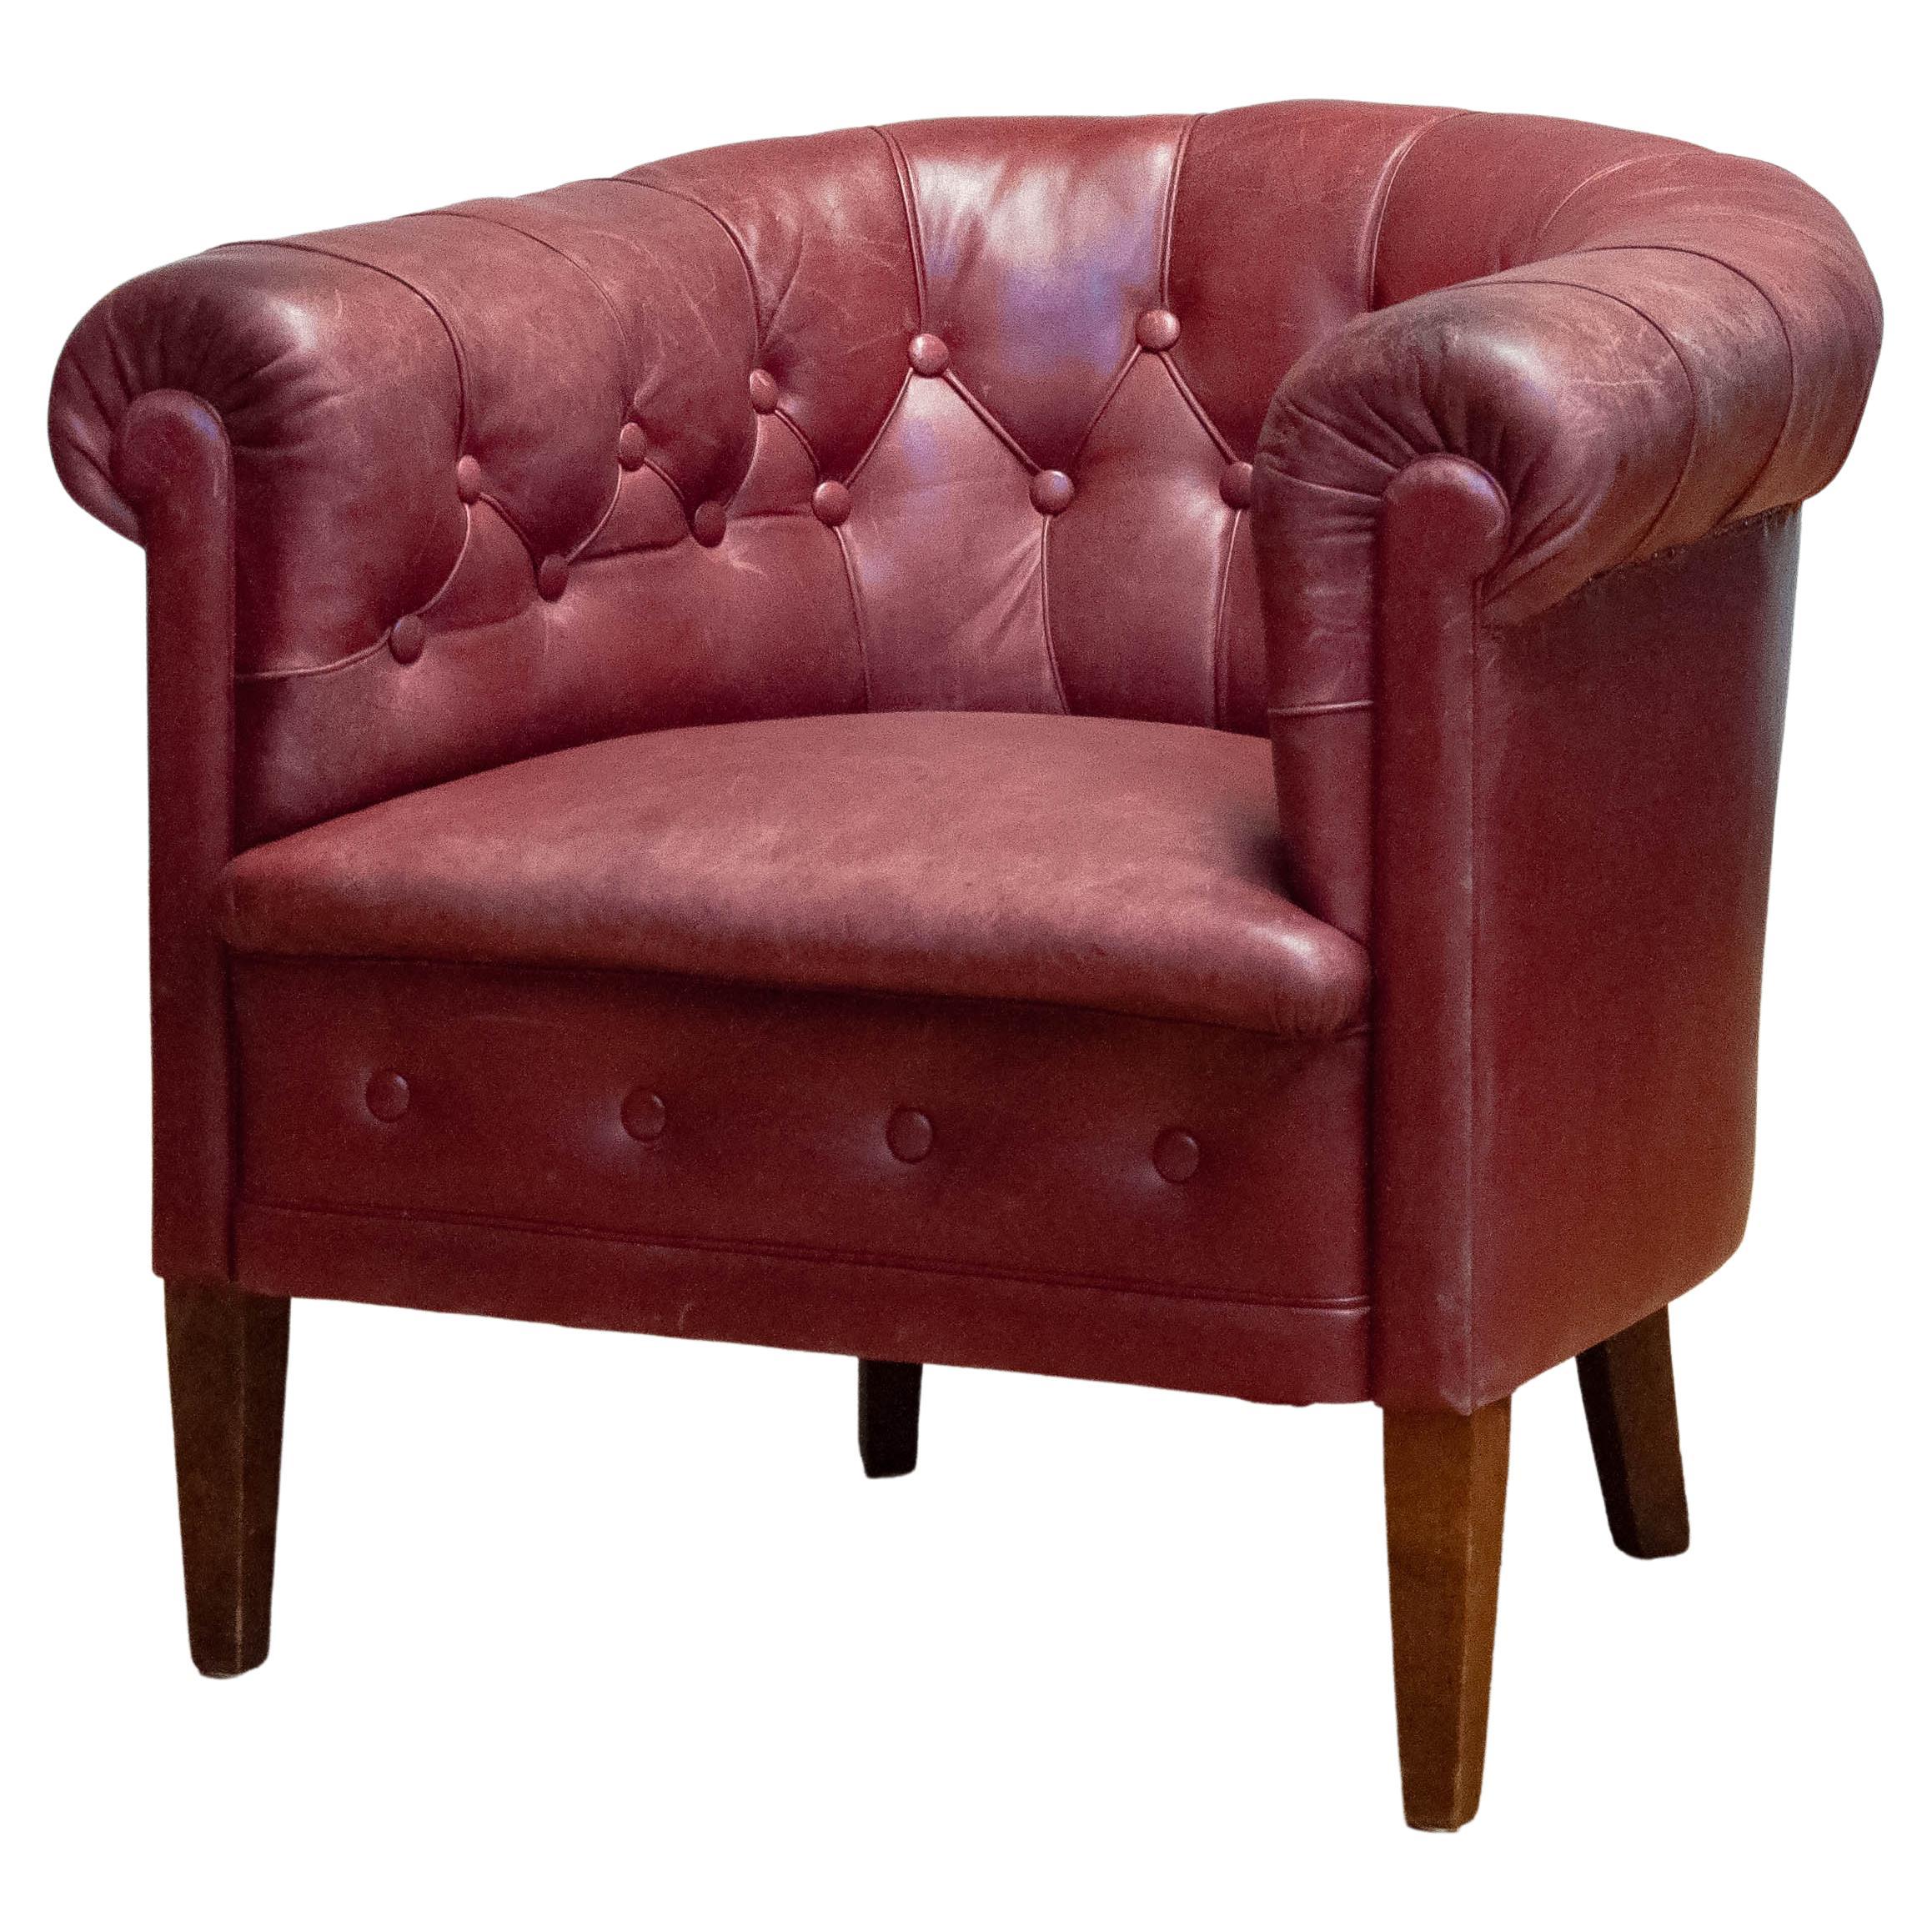 1930s Swedish Crimson Red Chesterfield Club / Lounge Chair in Patinated Leather